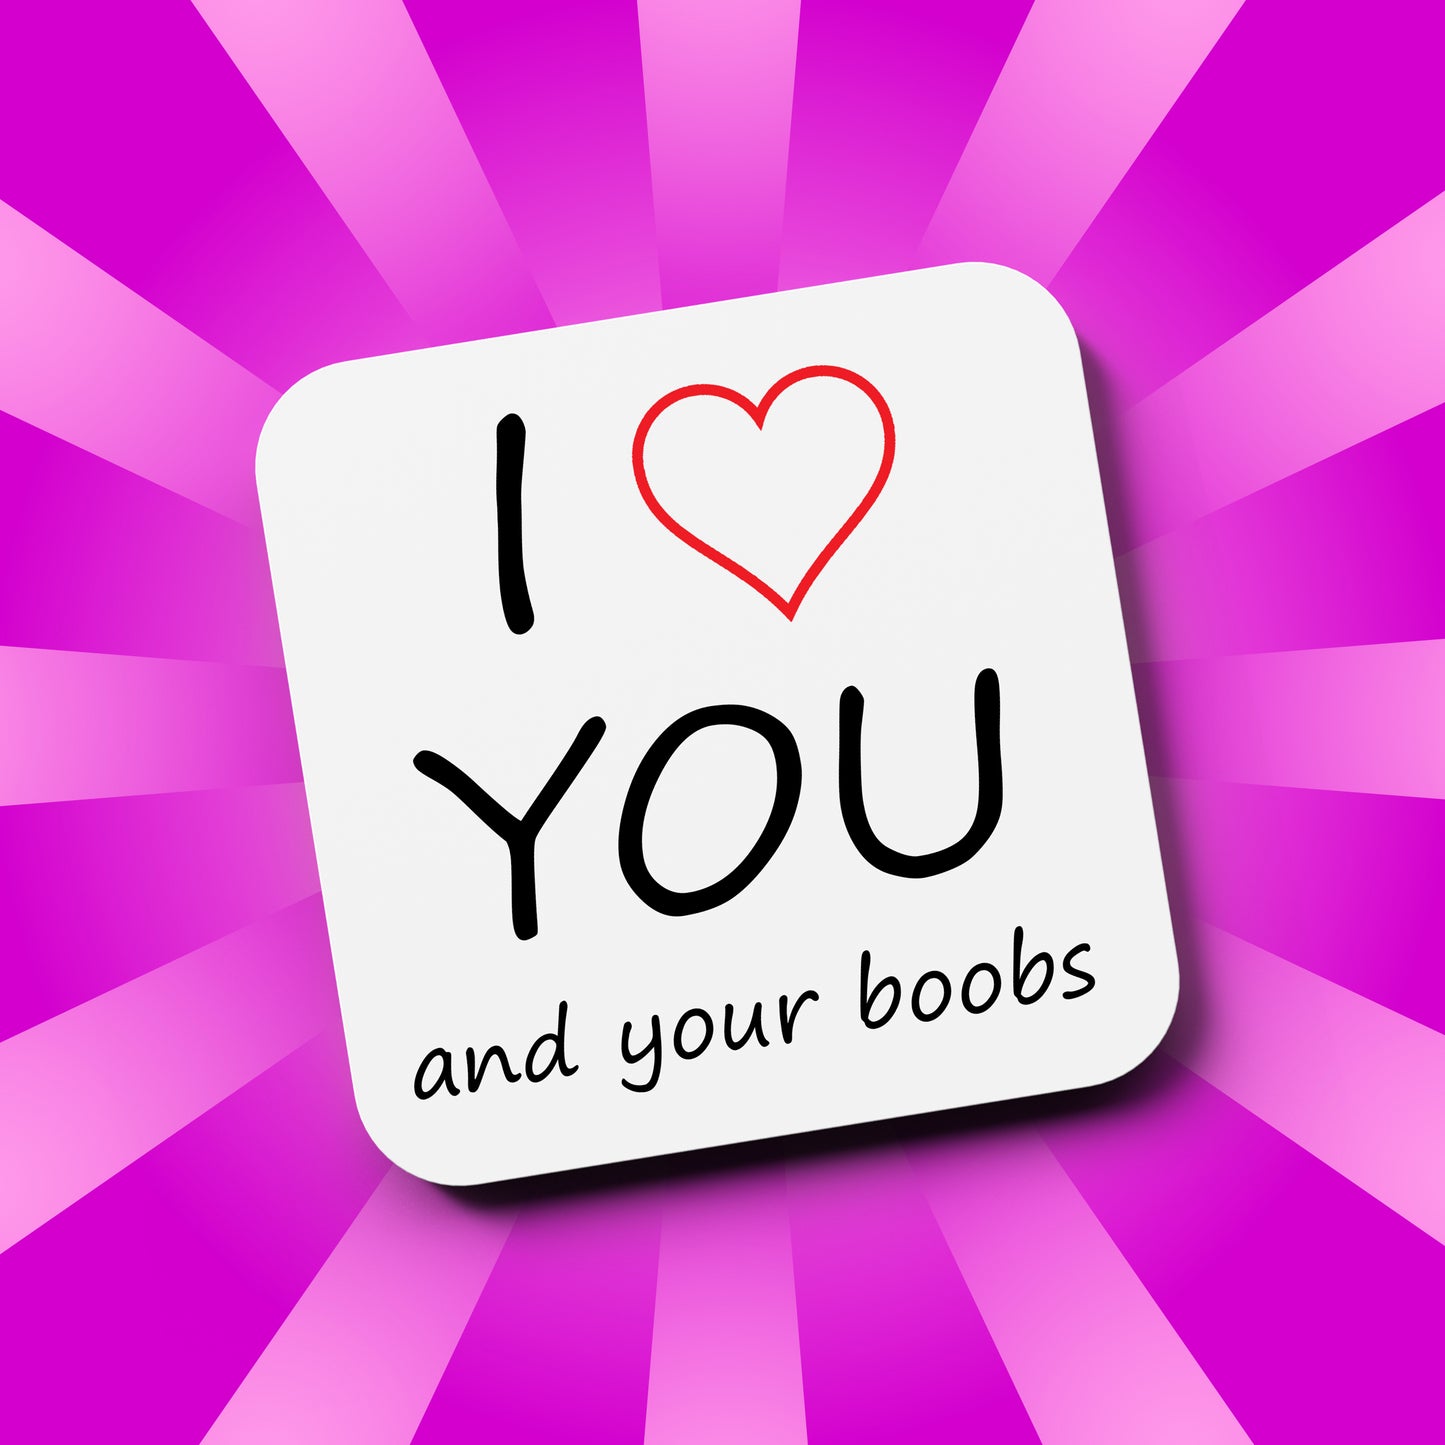 I Love You and Your Boobs